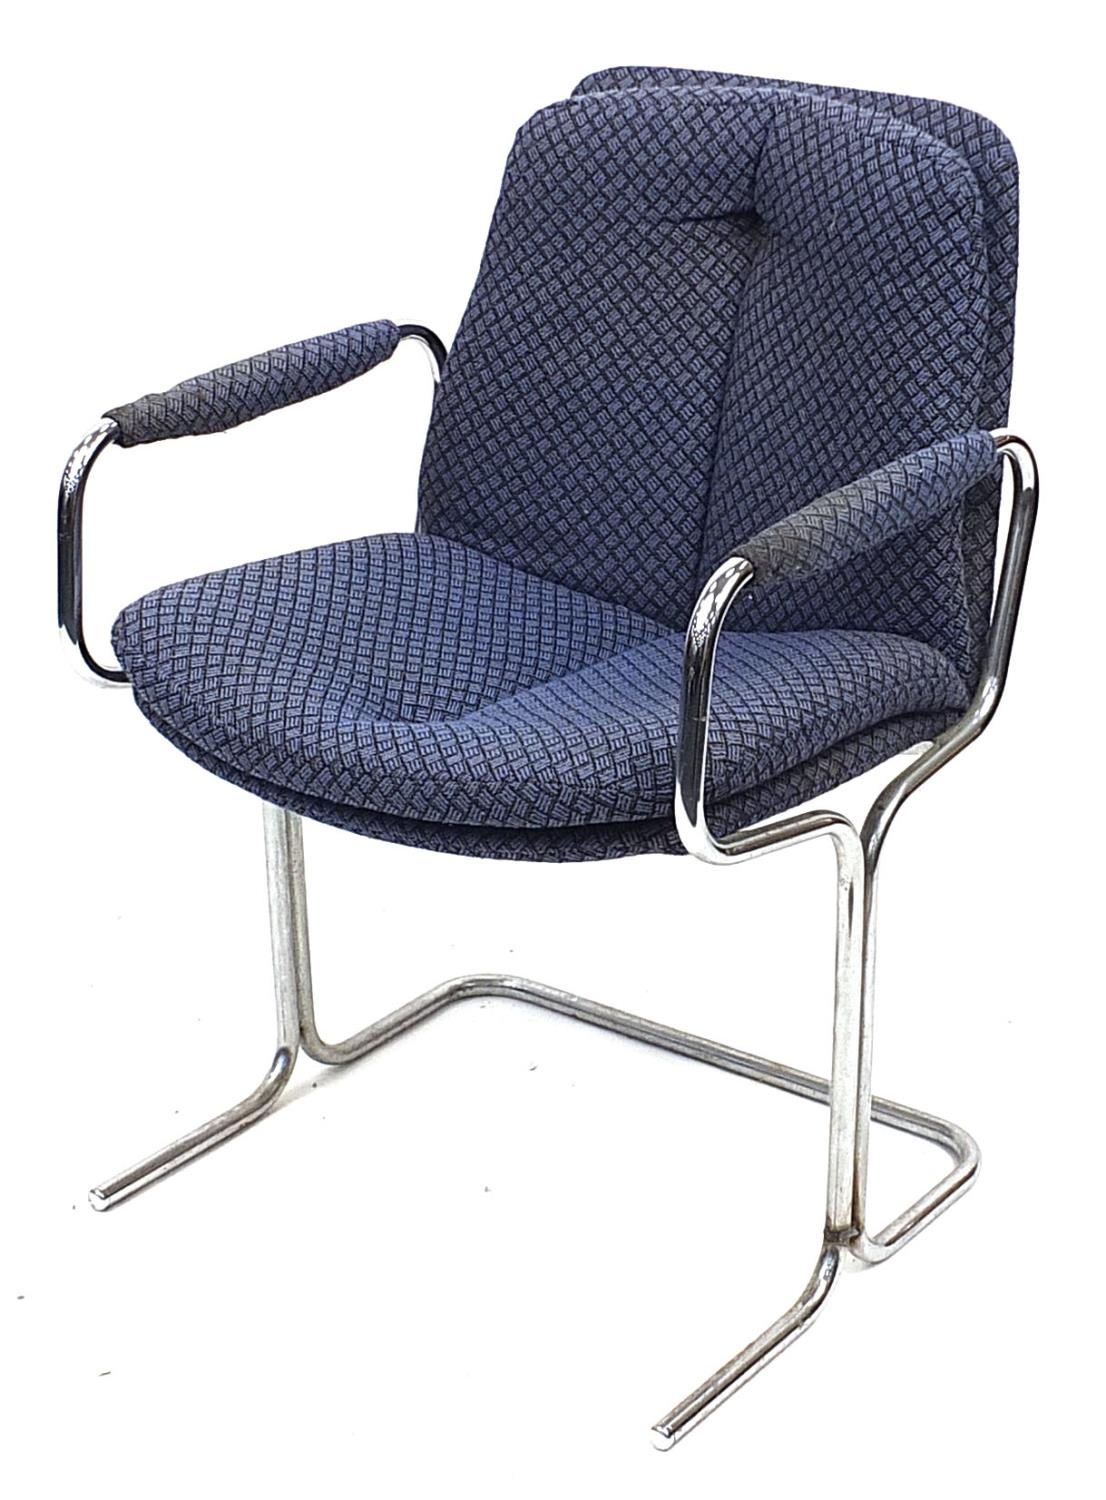 Vintage industrial design chromed chair with blue upholstery, 82cm high